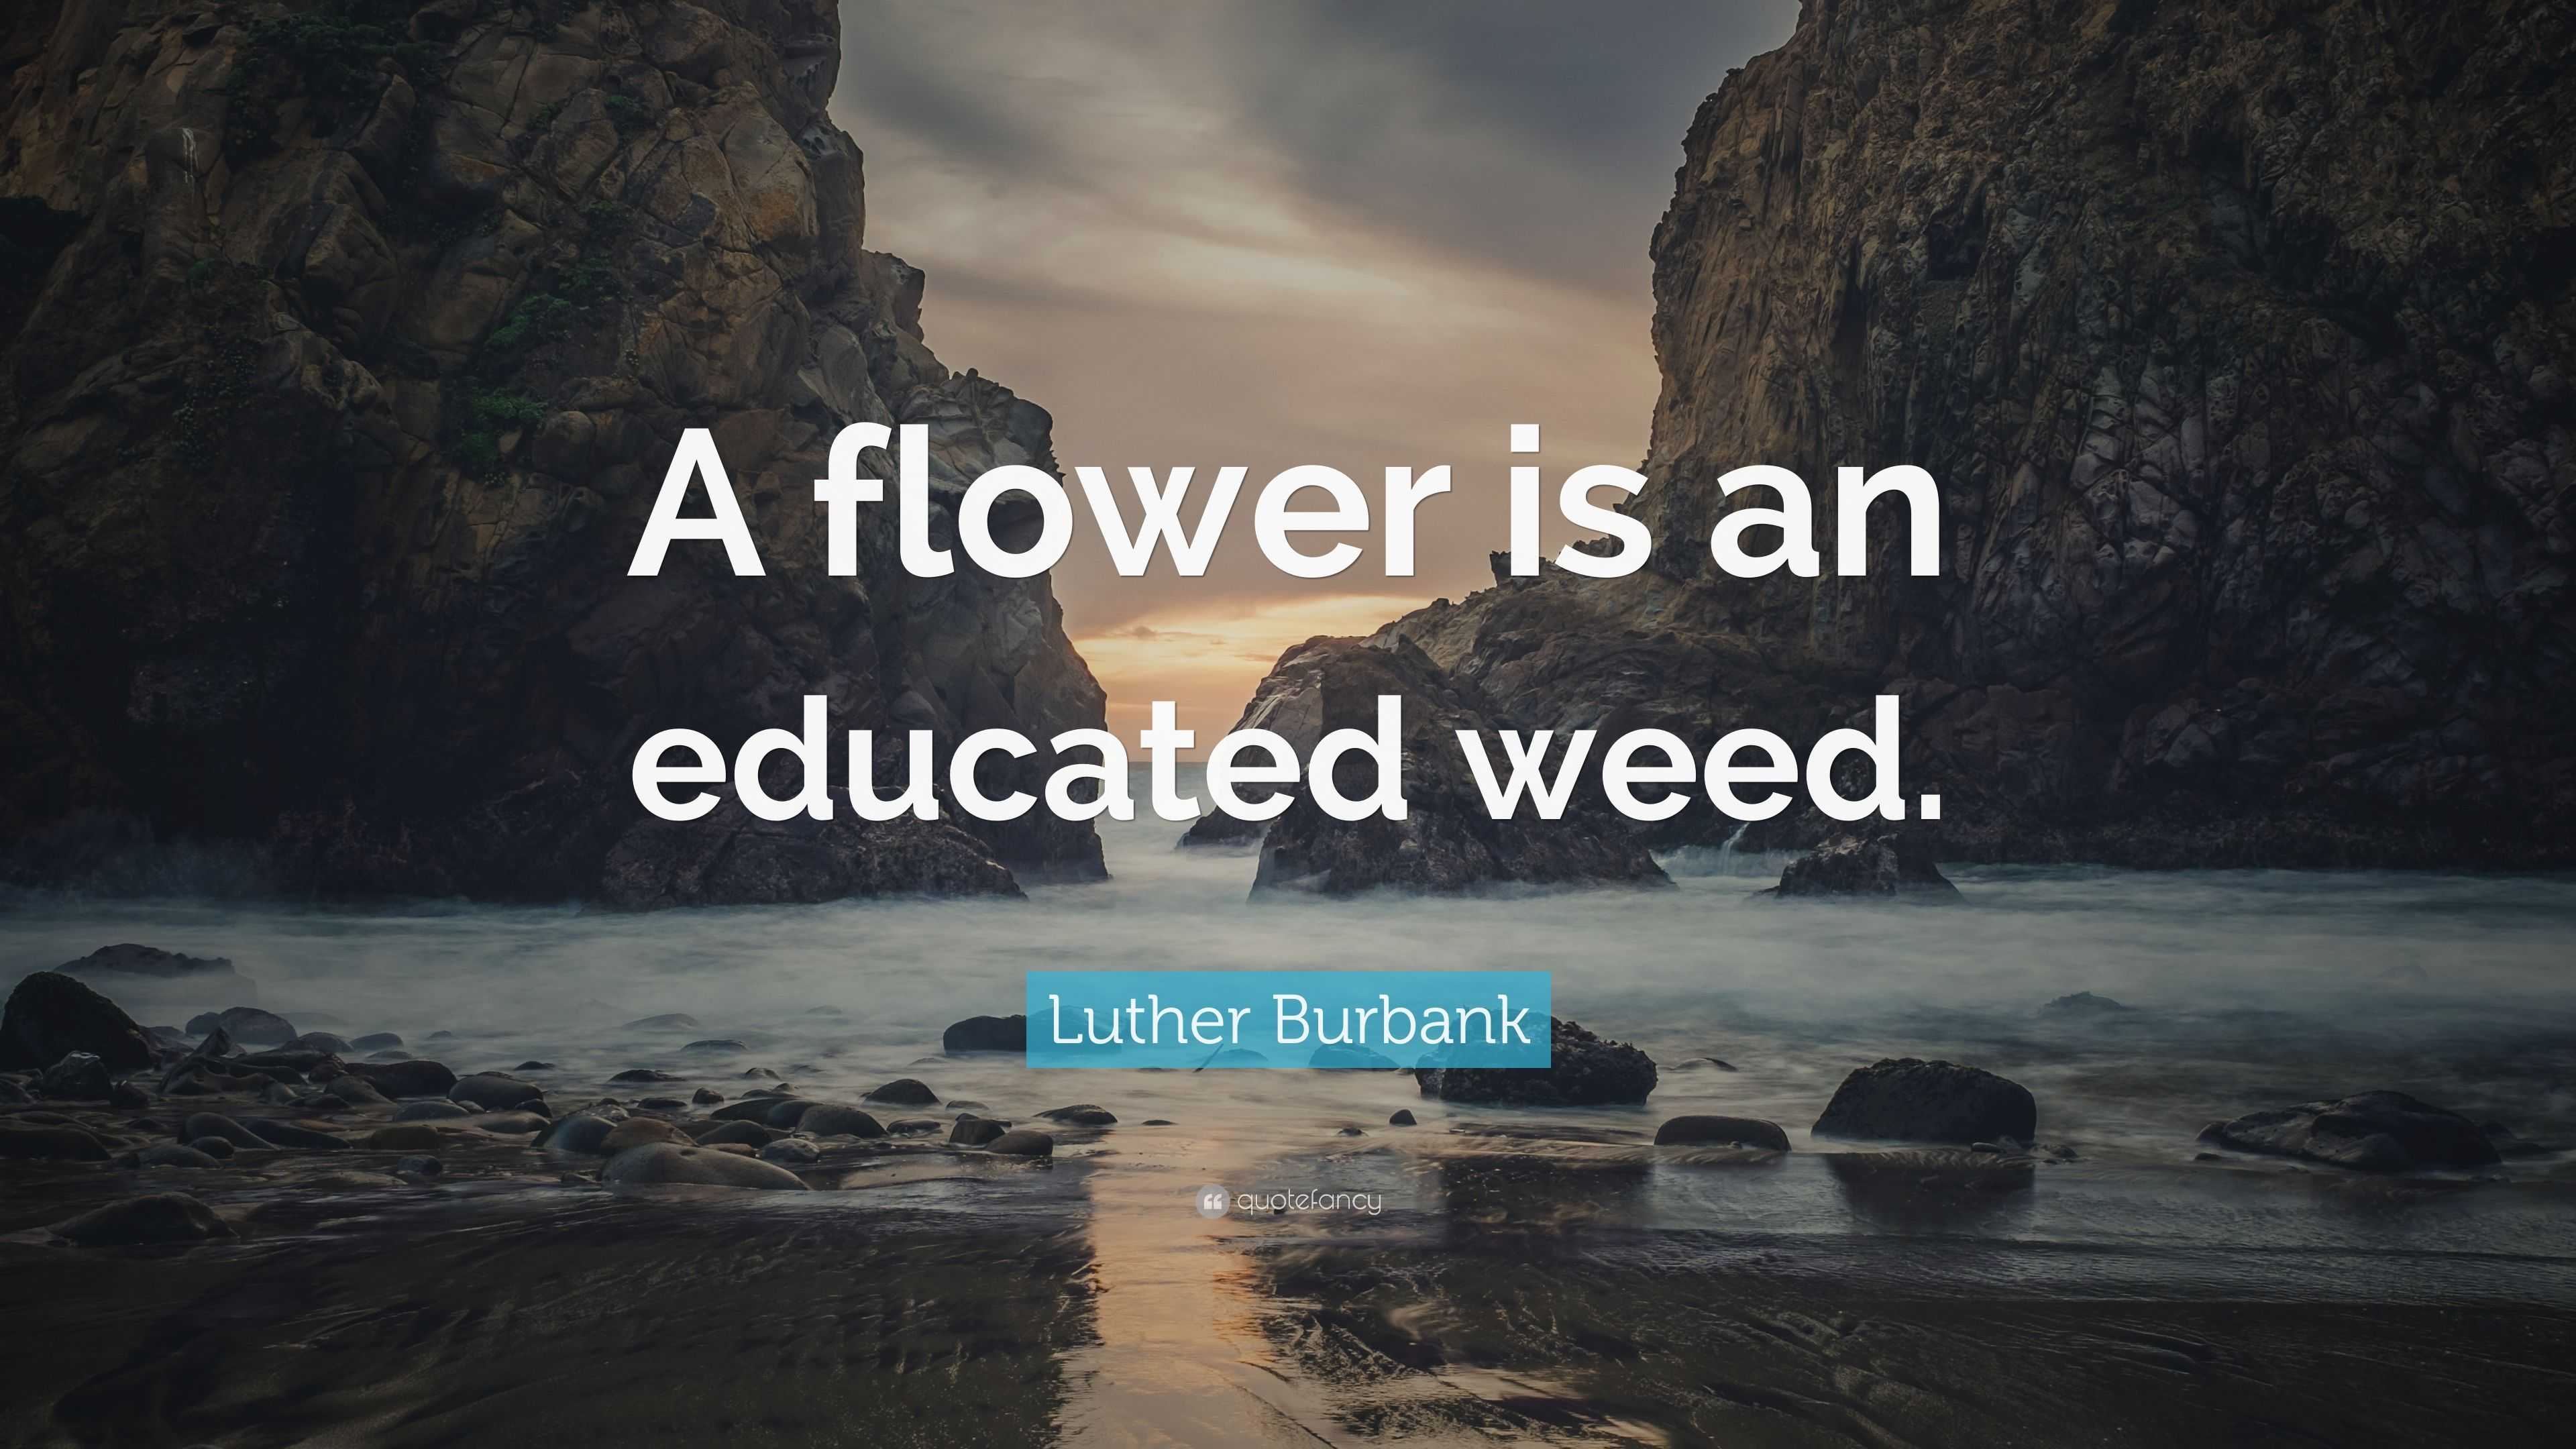 Luther Burbank Quote: “A flower is an educated weed.”